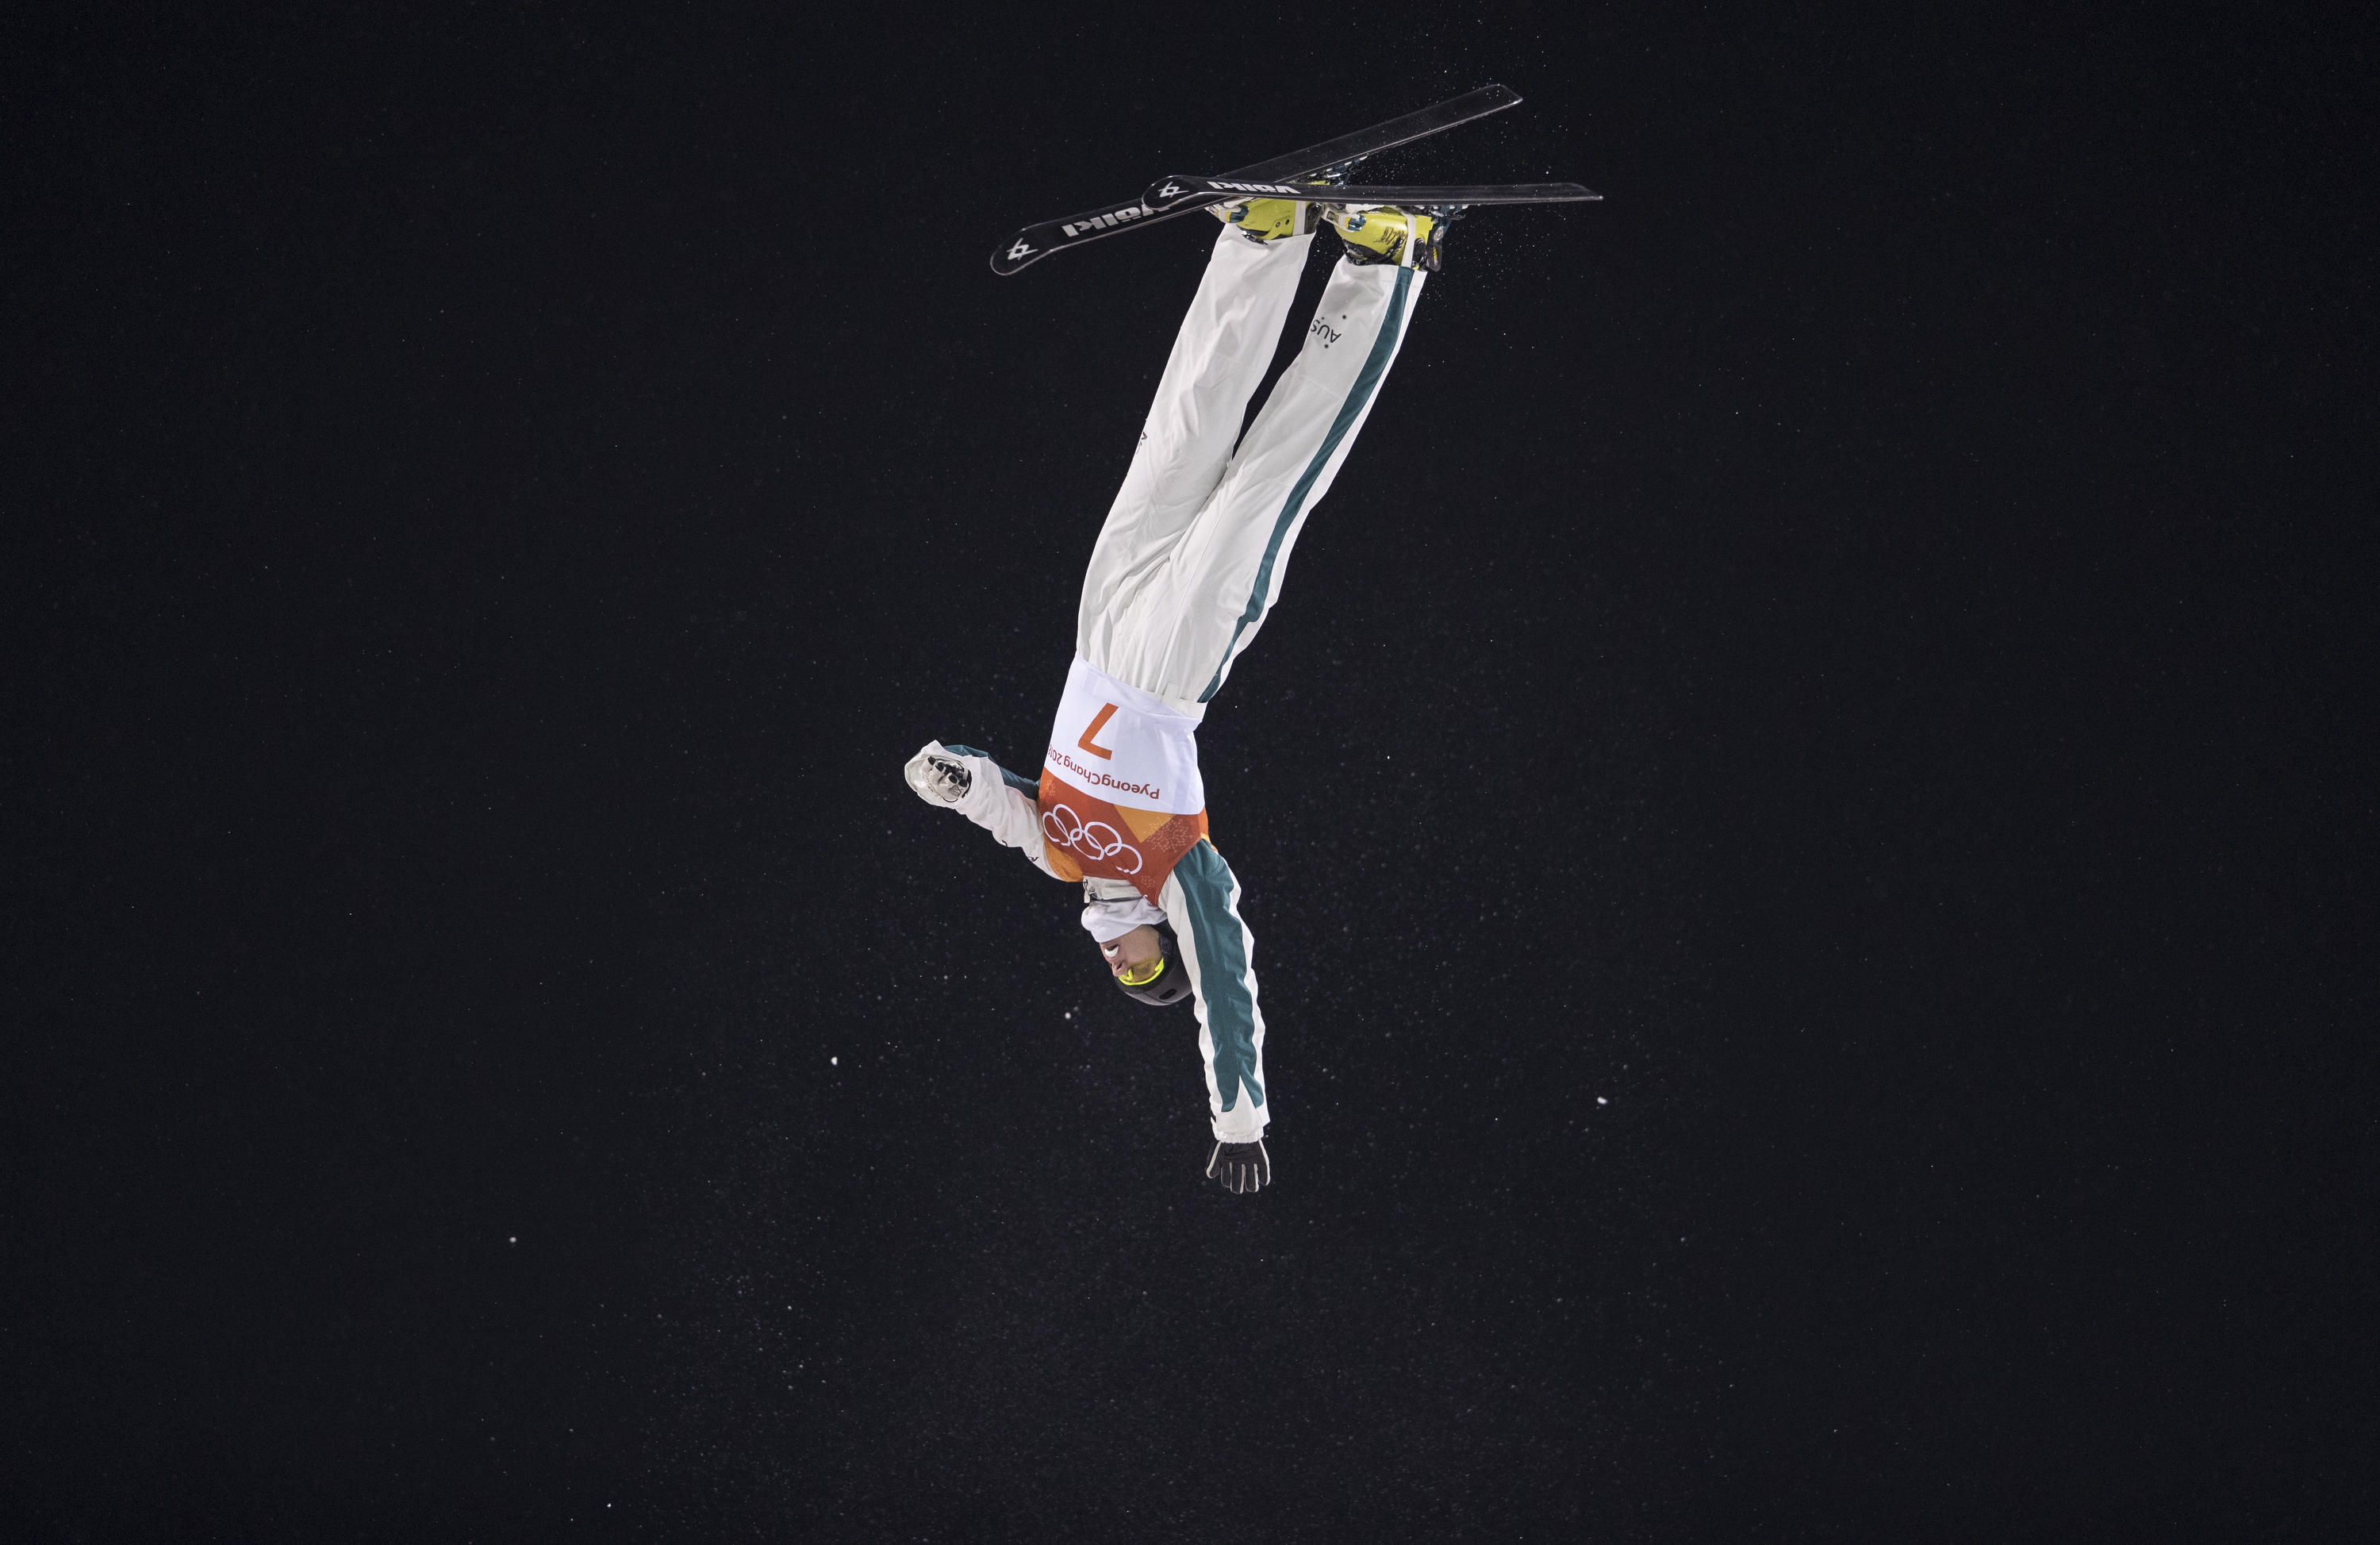 Three-time Olympian and Two-time Aerial Skiing World Champion Laura Peel